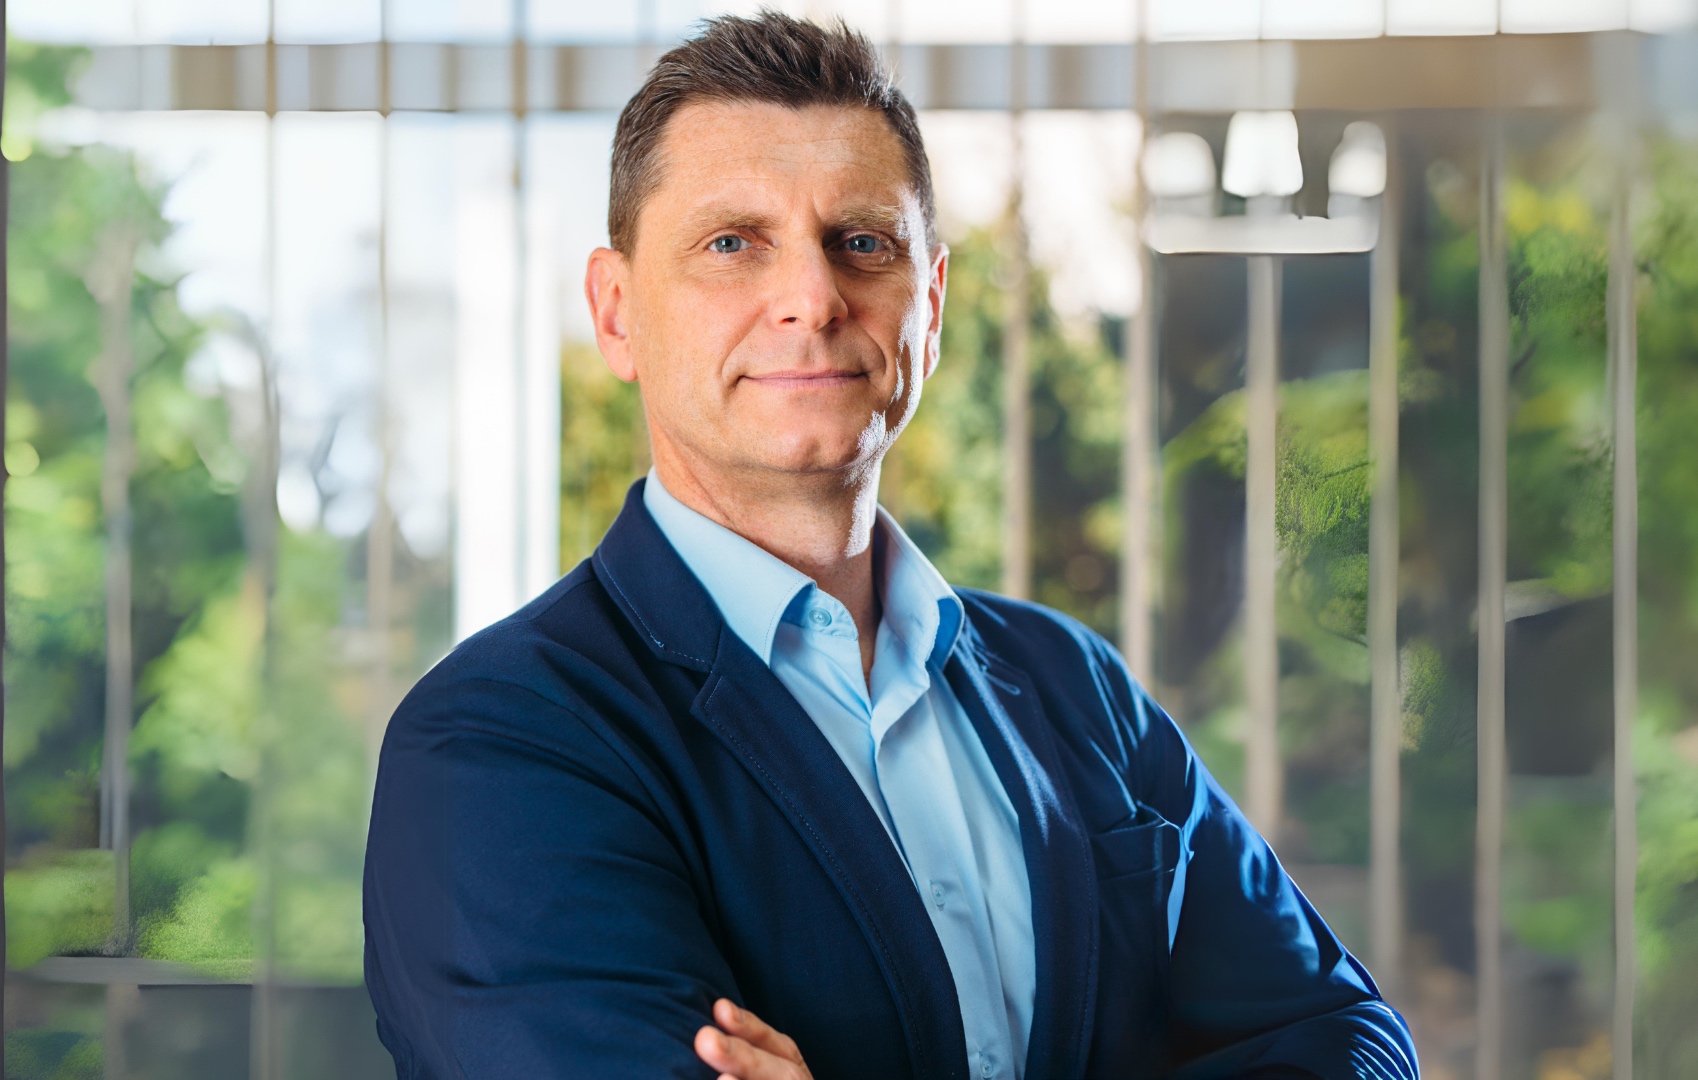 30 years of development and gathering experience – how did the construction industry change during this time? An interview with Artur Pluta – Managing Director of Democo Poland